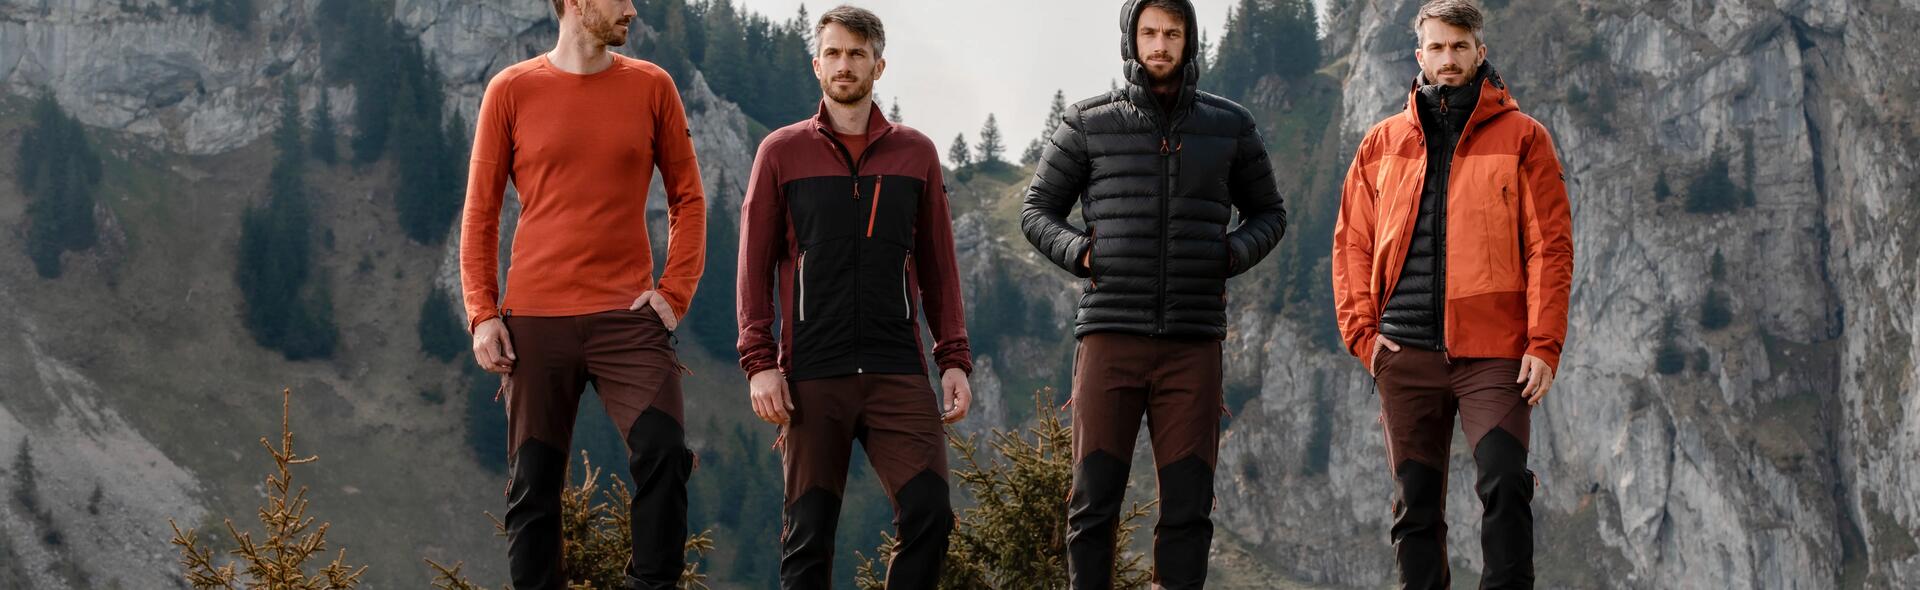 The clothes to wear for trekking The 4-layer system explained by mountain advanced specialists.